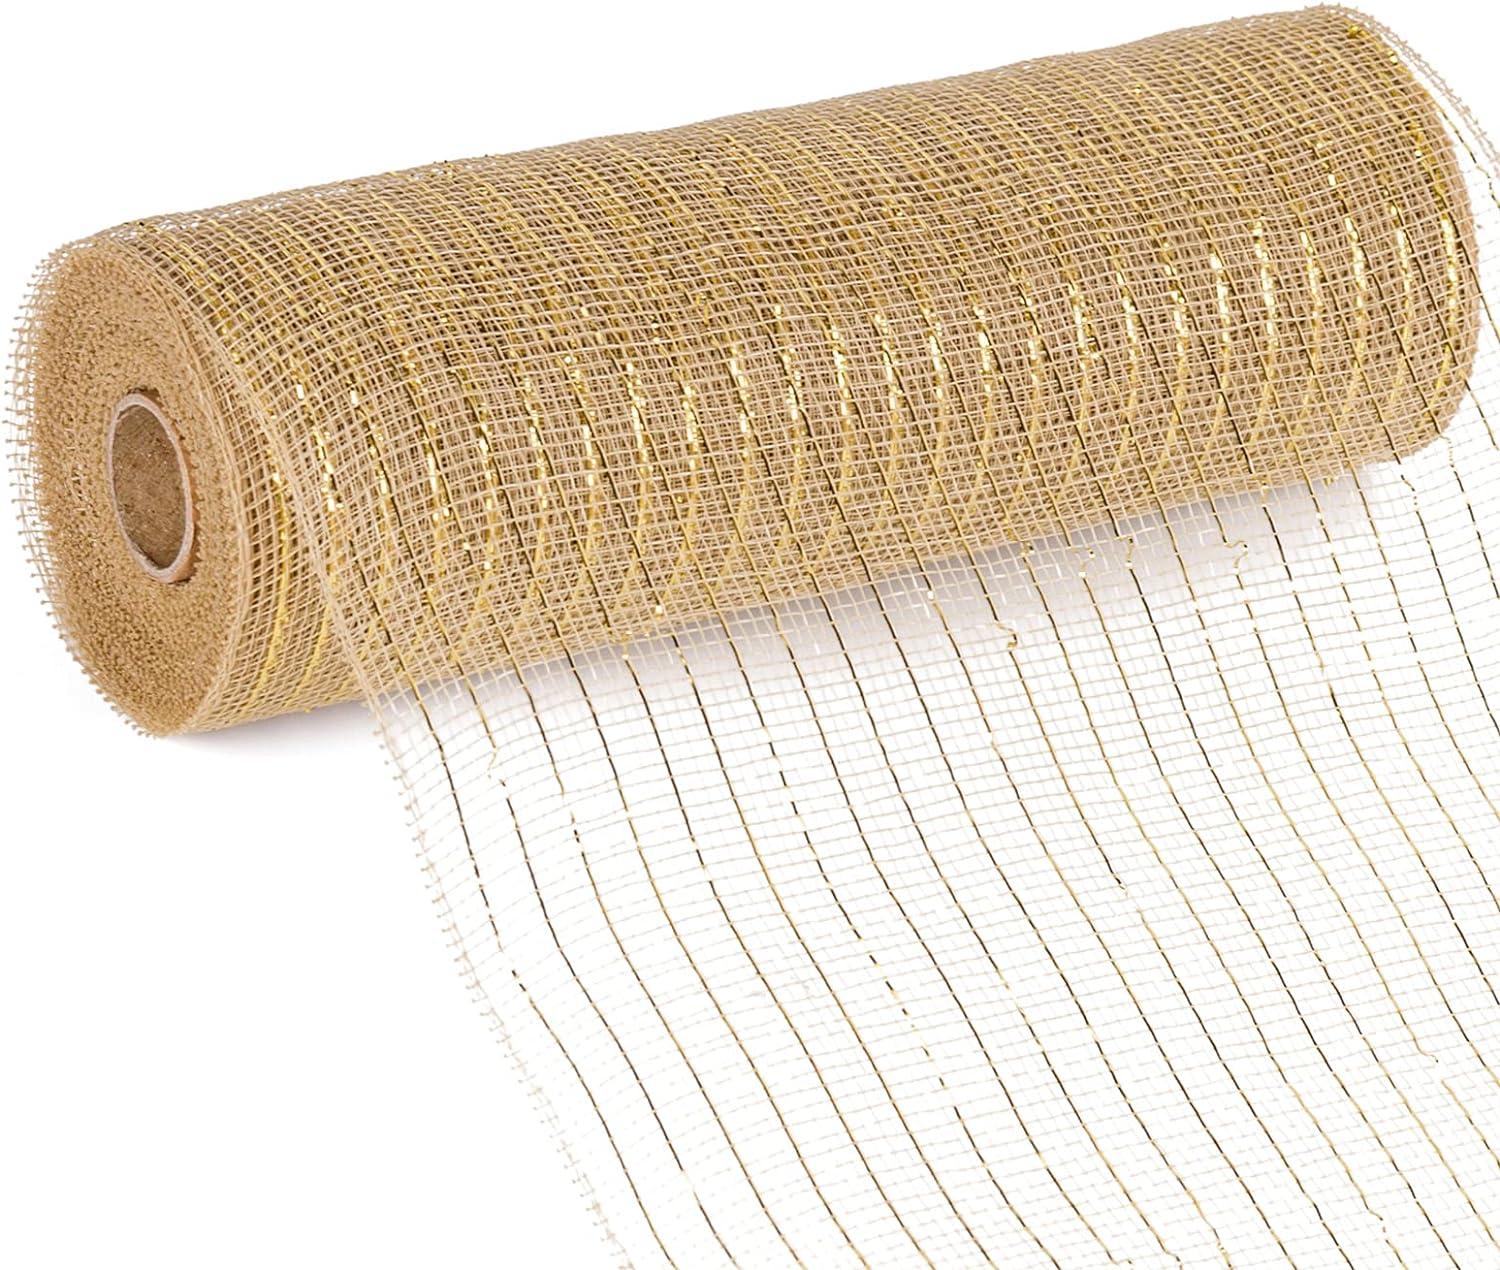 LaRibbons Deco Mesh Ribbon - 10 inch x 30 feet Each Roll - Metallic Foil  Cream Set for Wreaths Swags and Decorating - 4 Pack 10 Inch x 30 Feet Cream